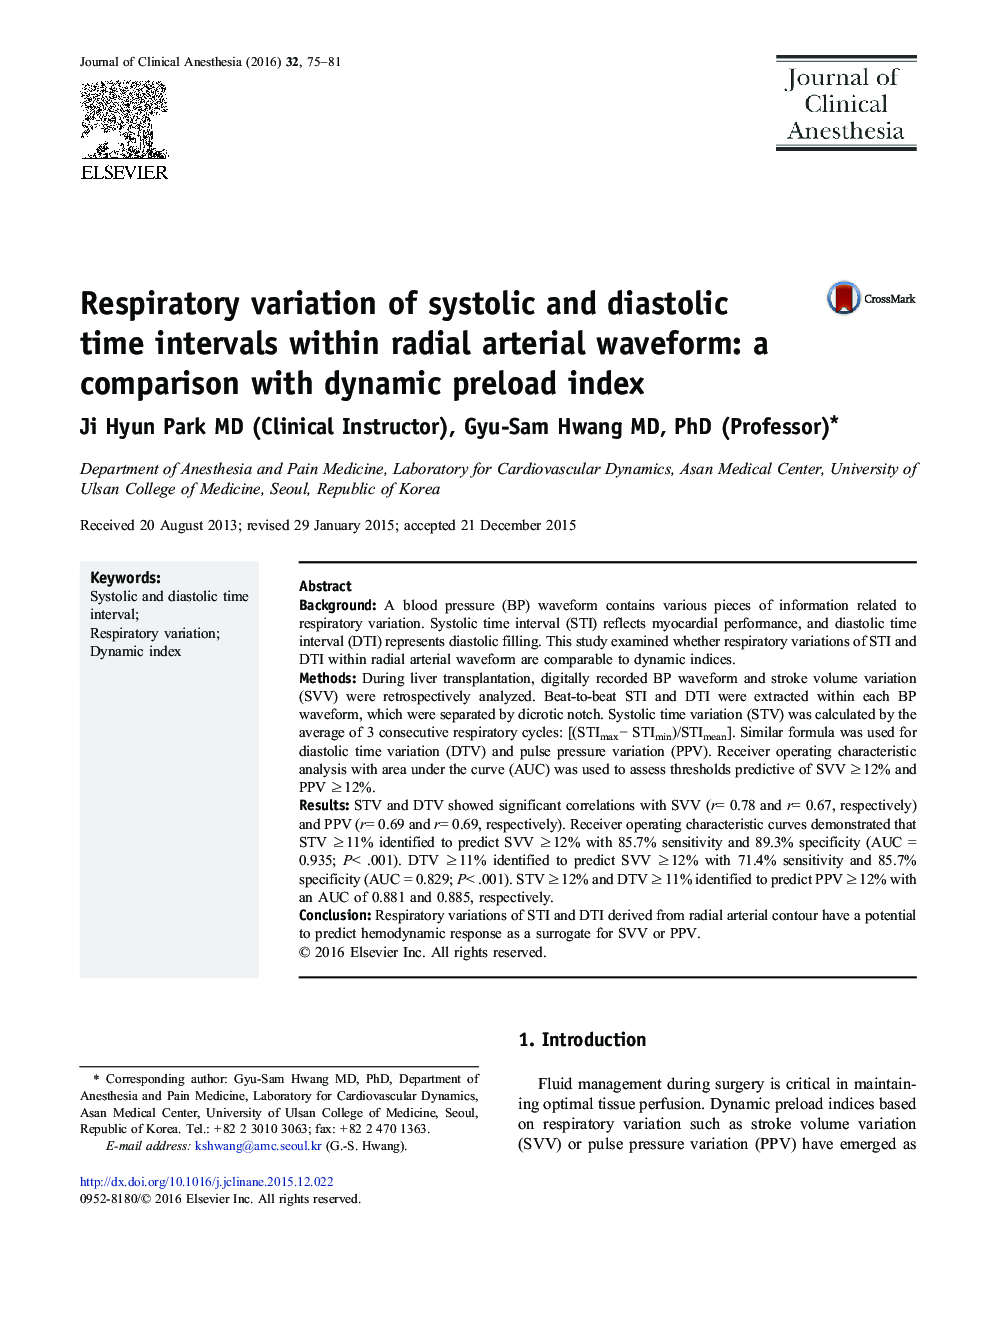 Respiratory variation of systolic and diastolic time intervals within radial arterial waveform: a comparison with dynamic preload index